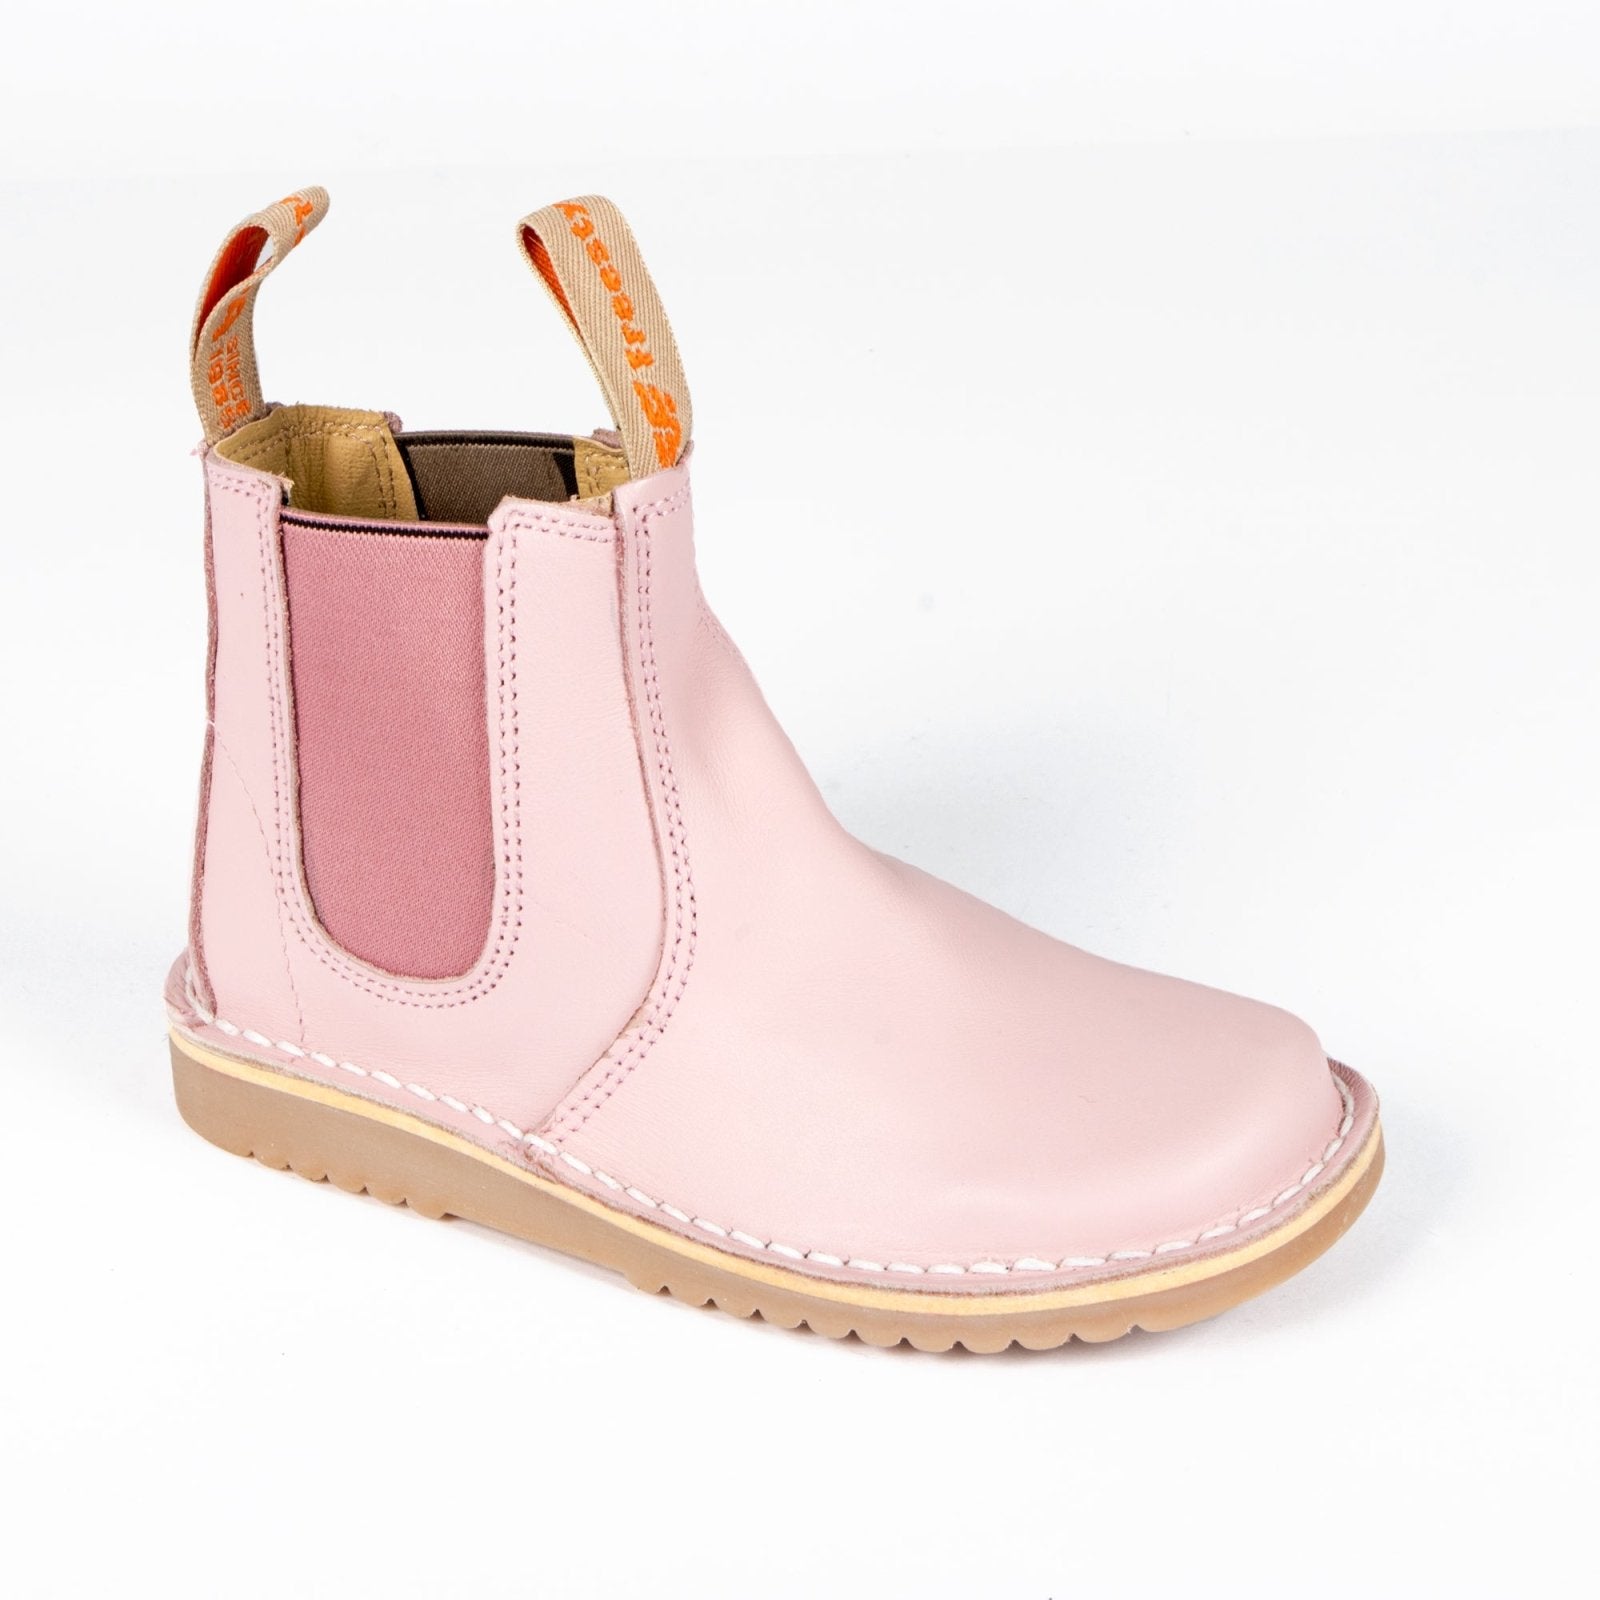 Karoo Kids Premium Soft Leather Boot - Freestyle SA Proudly local leather boots veldskoens vellies leather shoes suede veldskoens